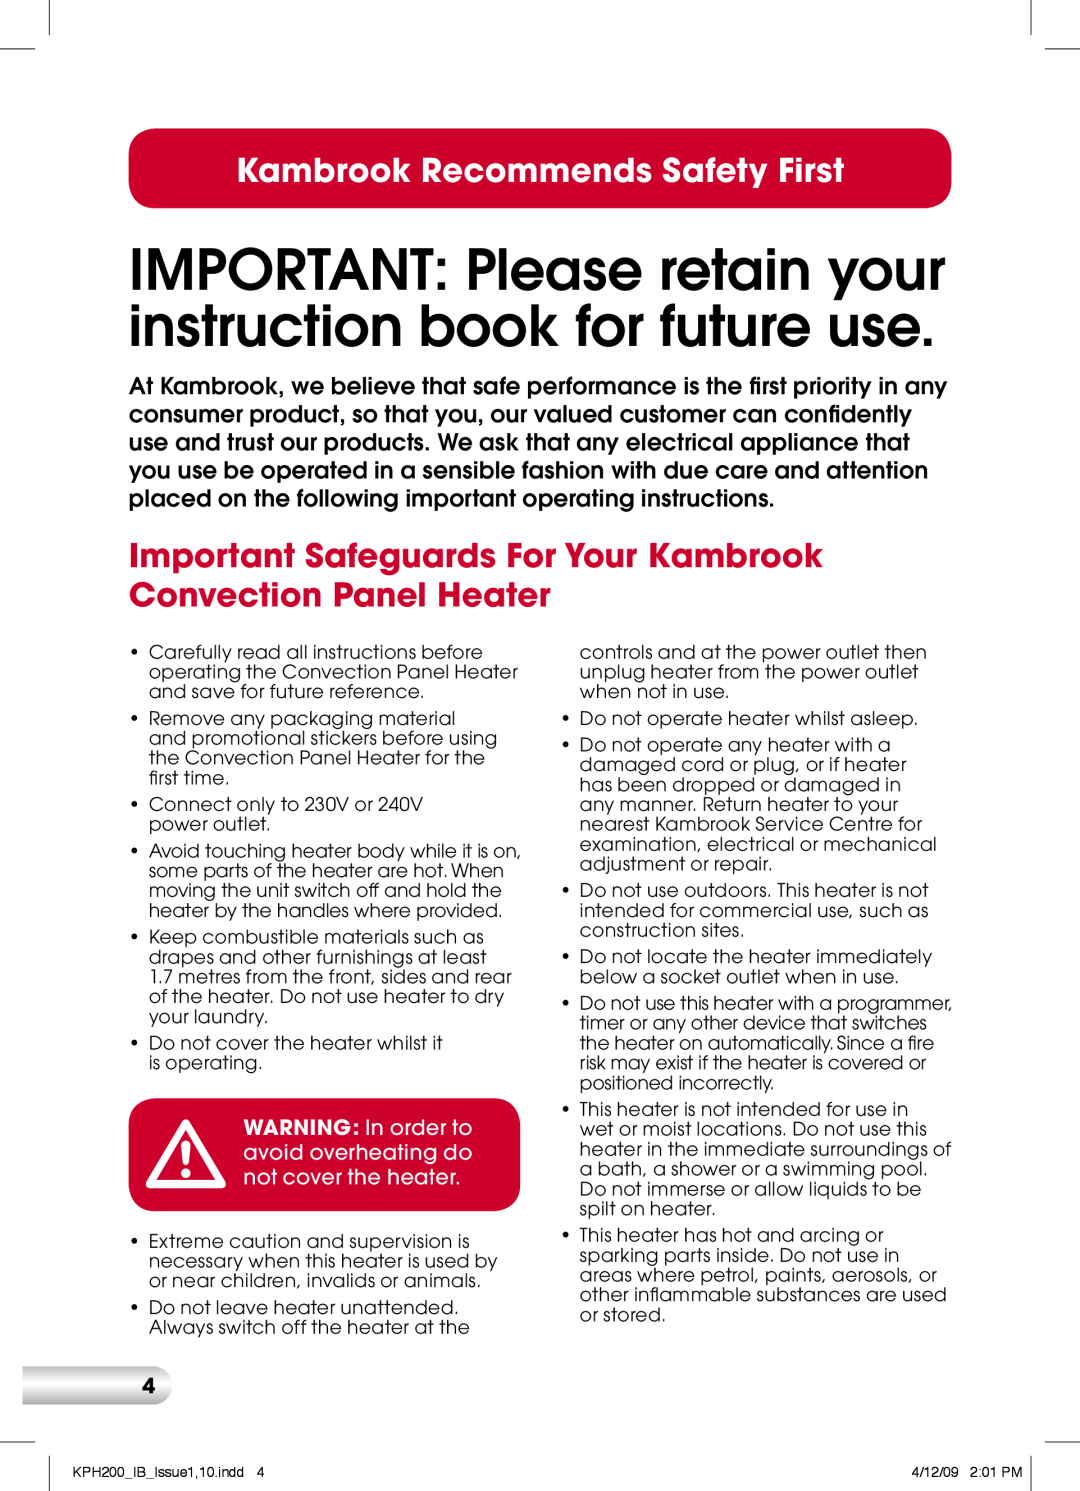 Kambrook KPH200 manual Kambrook Recommends Safety First 